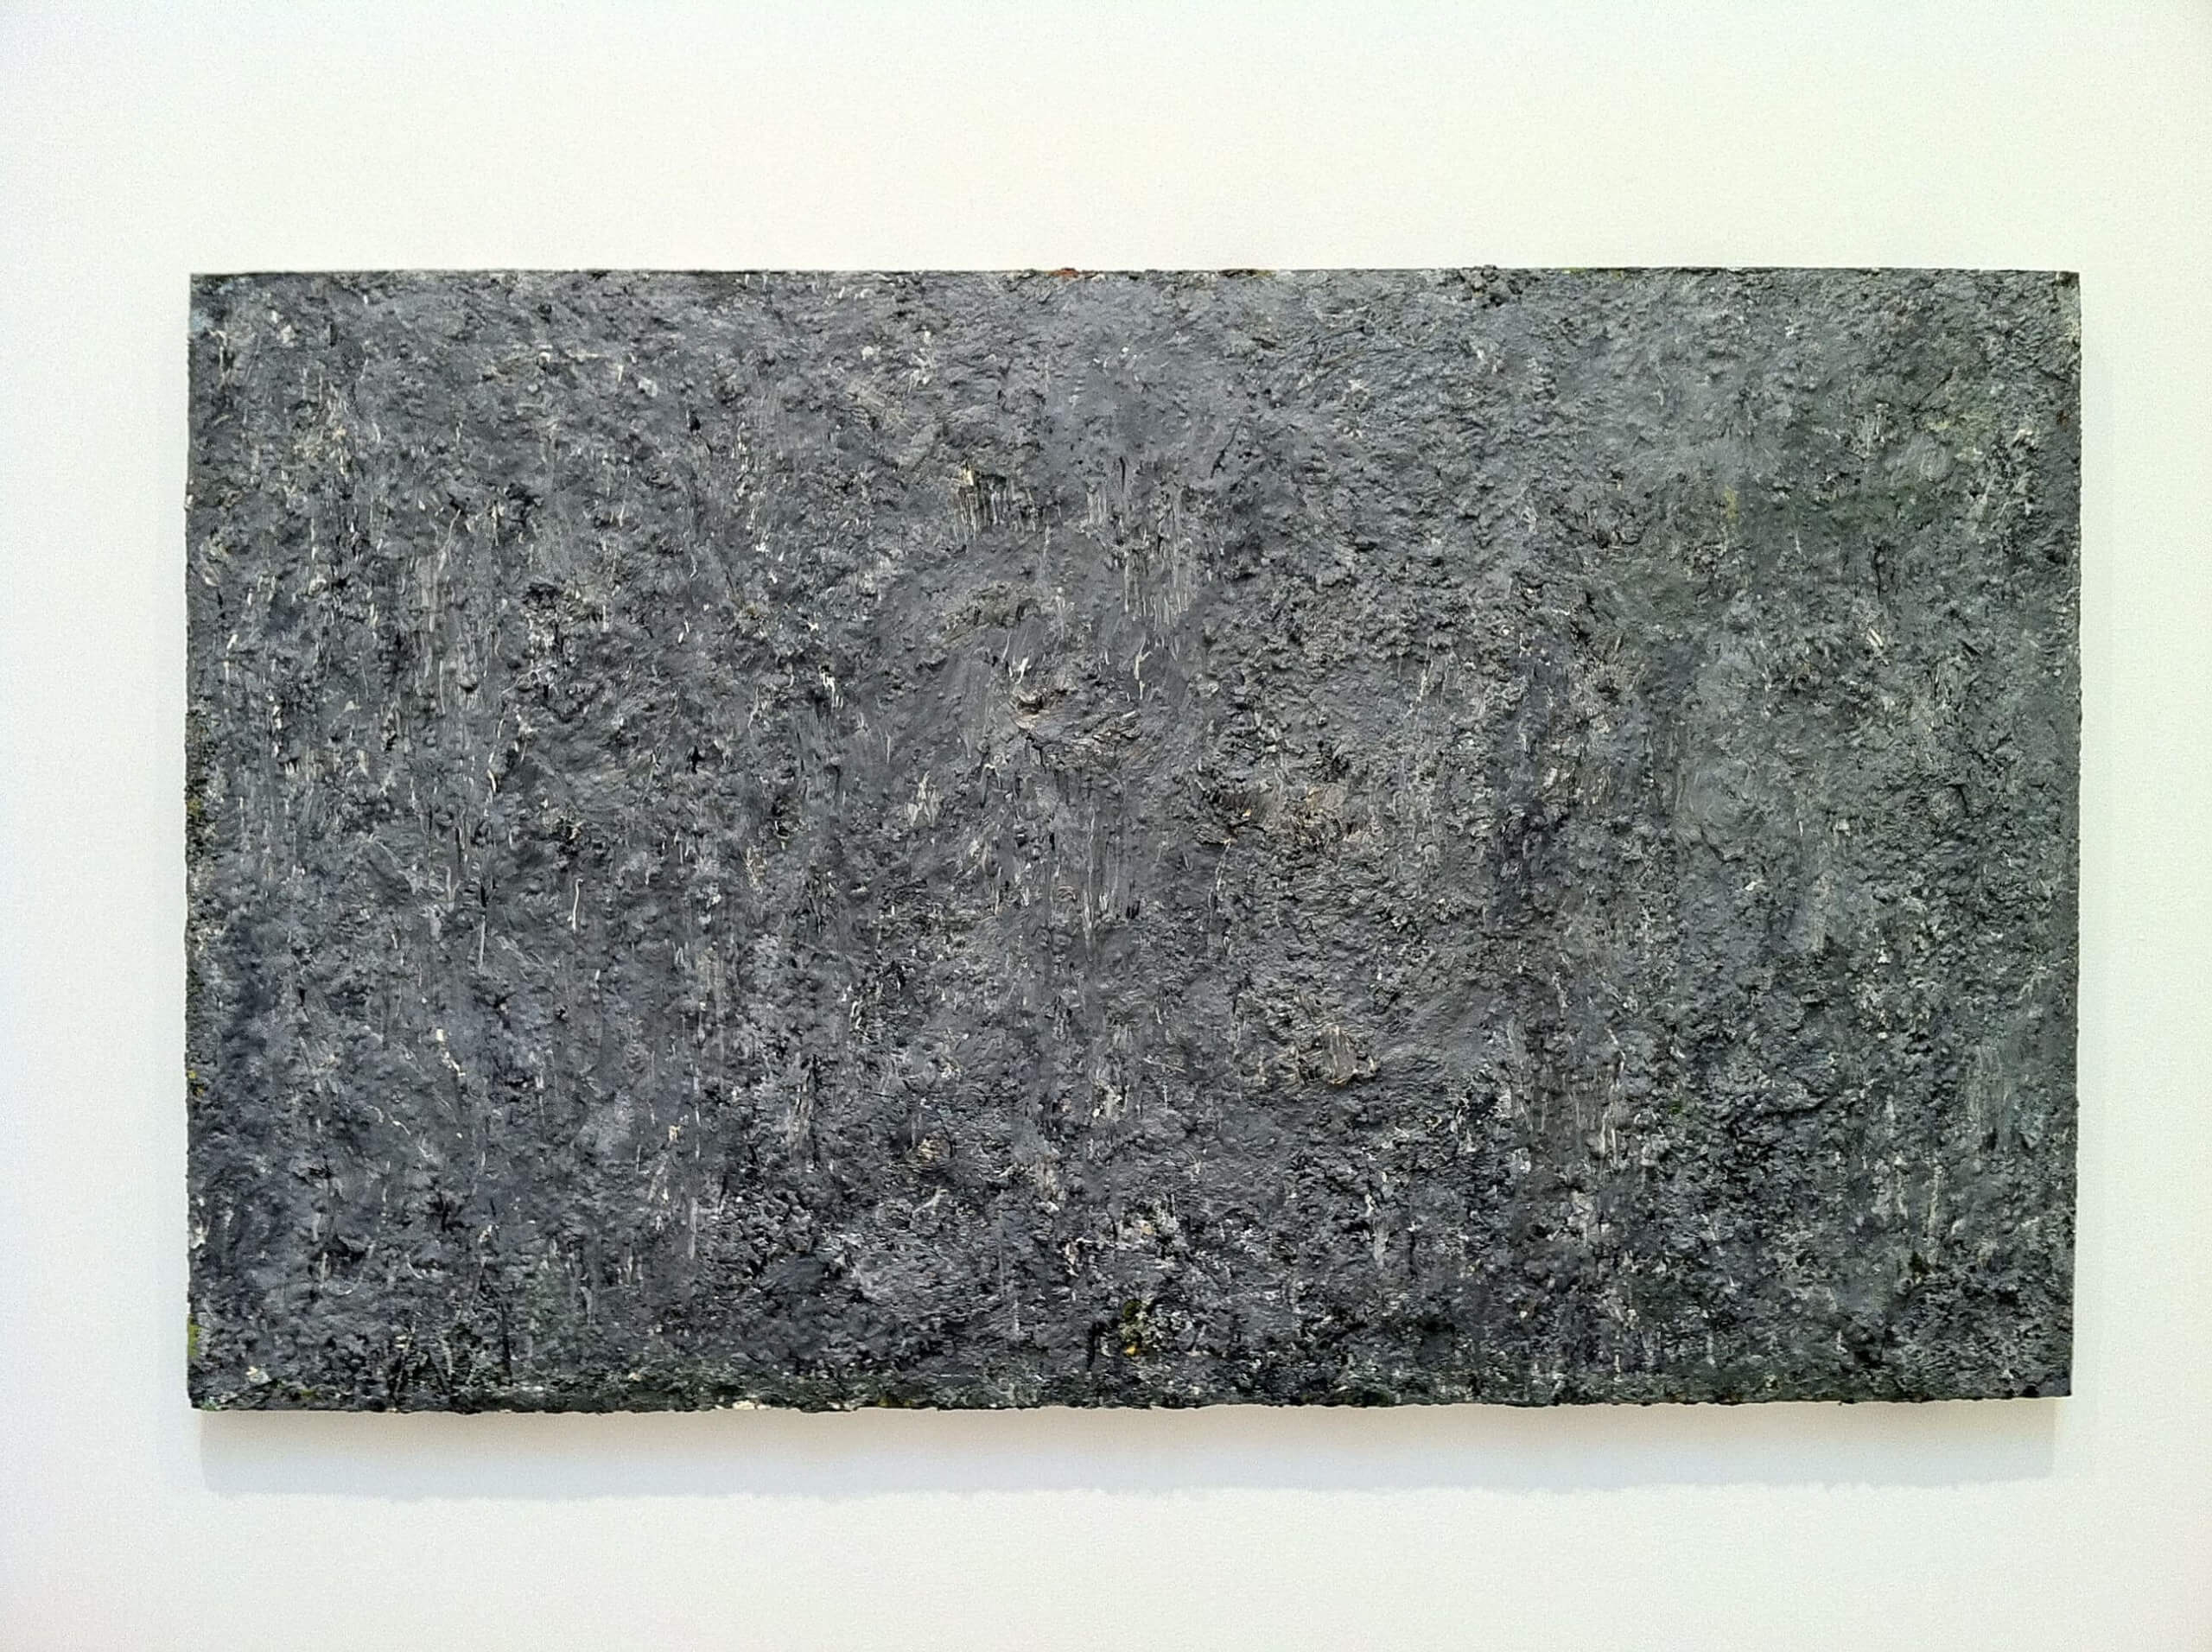 Milton Resnick, Untitled 1988, oil on canvas, 45 x 75 inches (courtesy Cheim & Read)